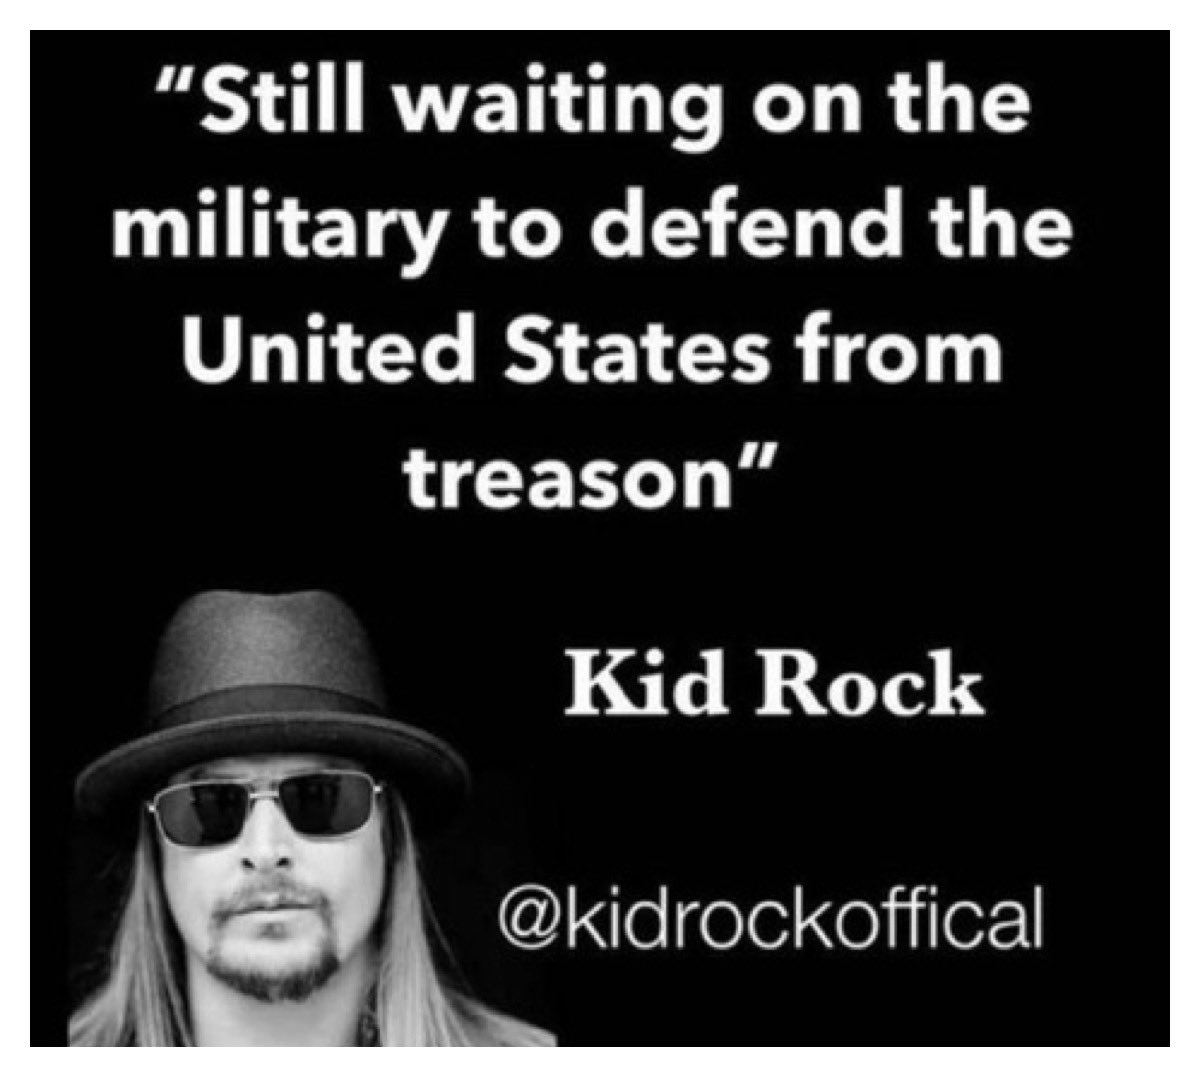 I’m with Kid Rock on this one!